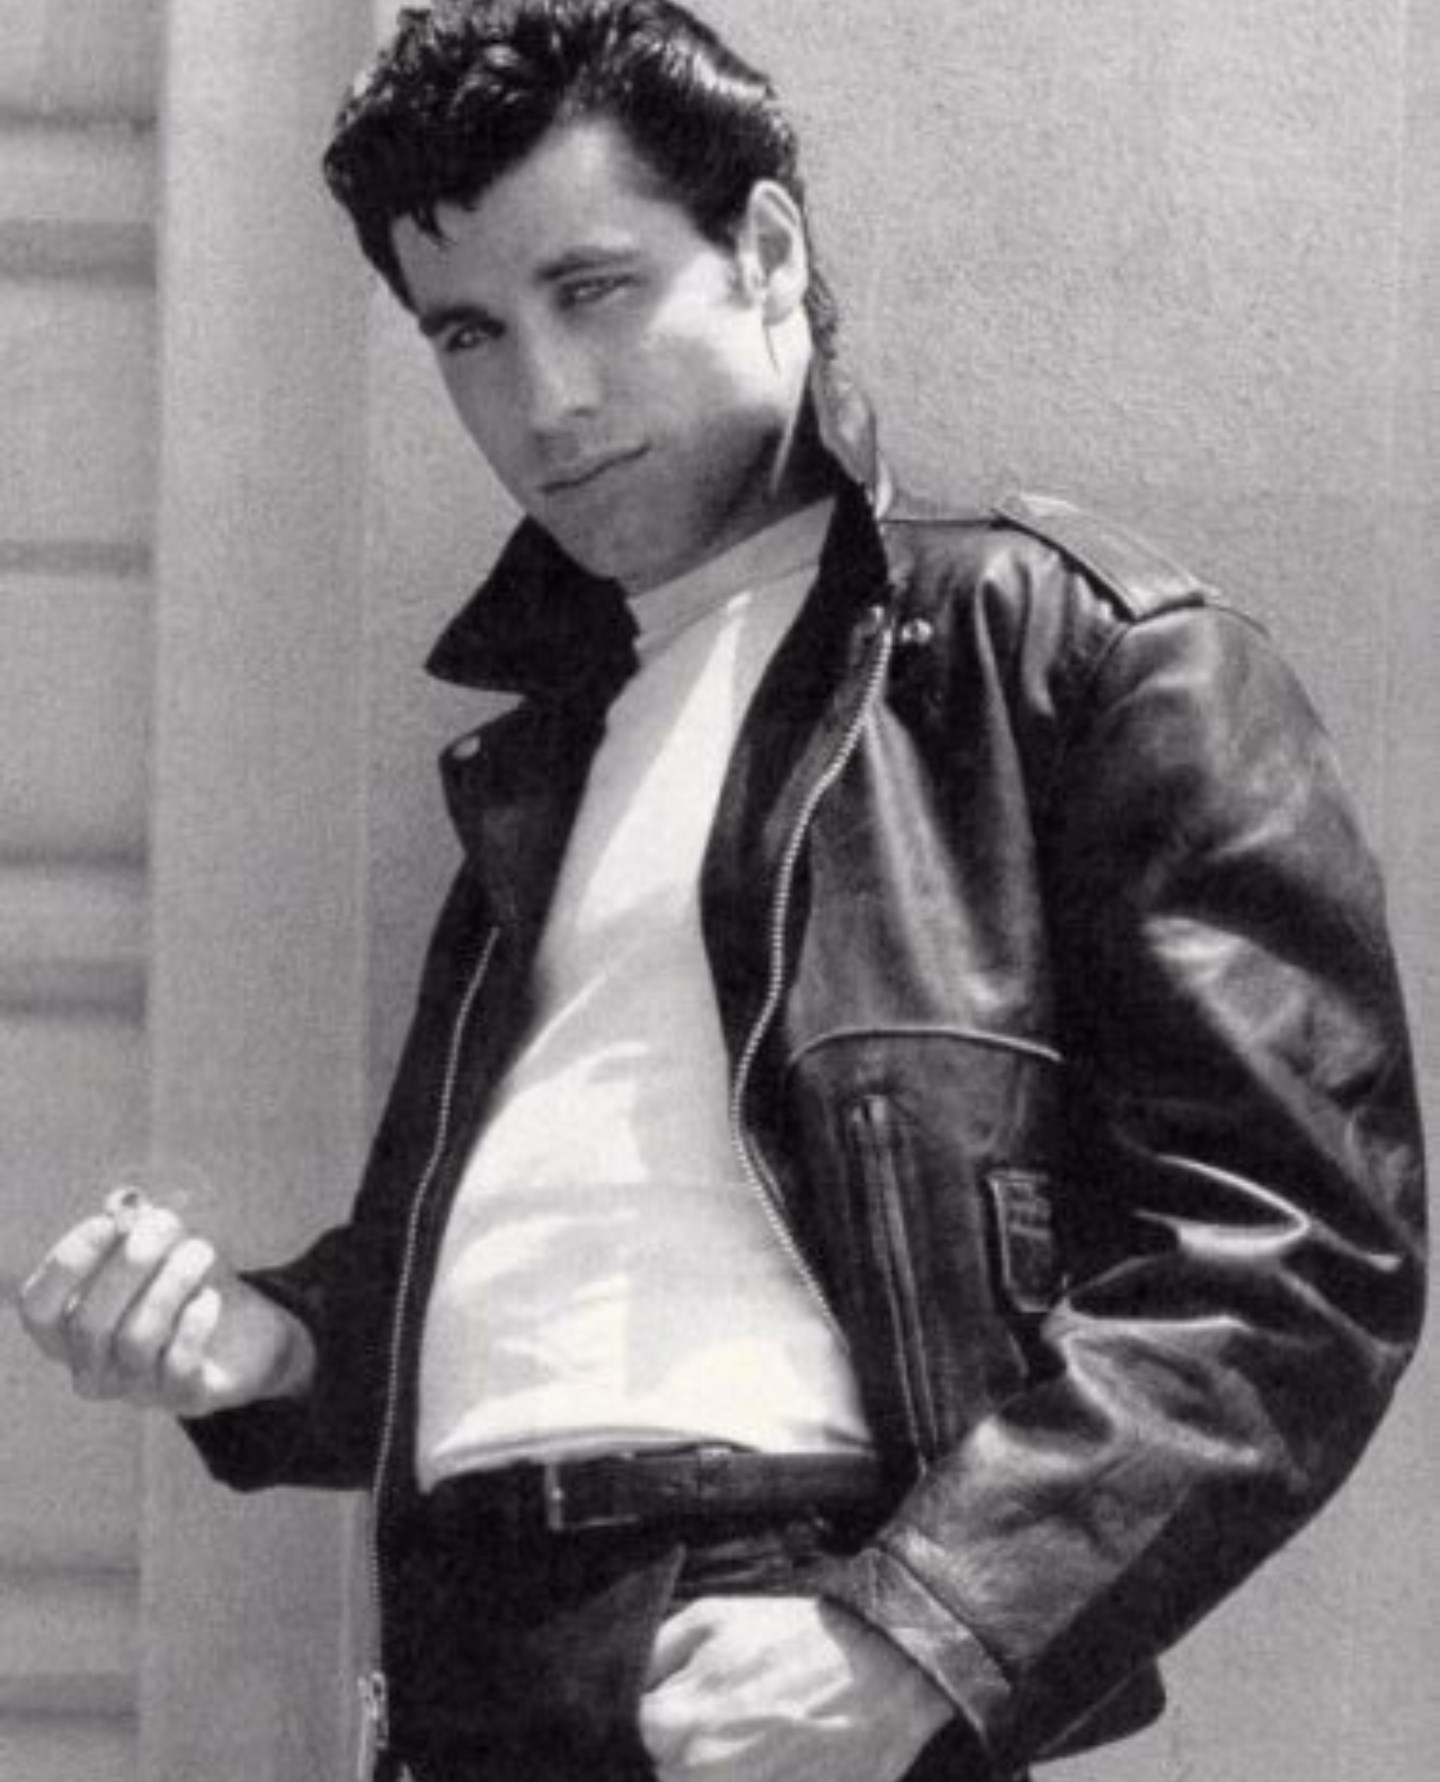 1950s Greasers: Everything You Know about Greasers is Wrong